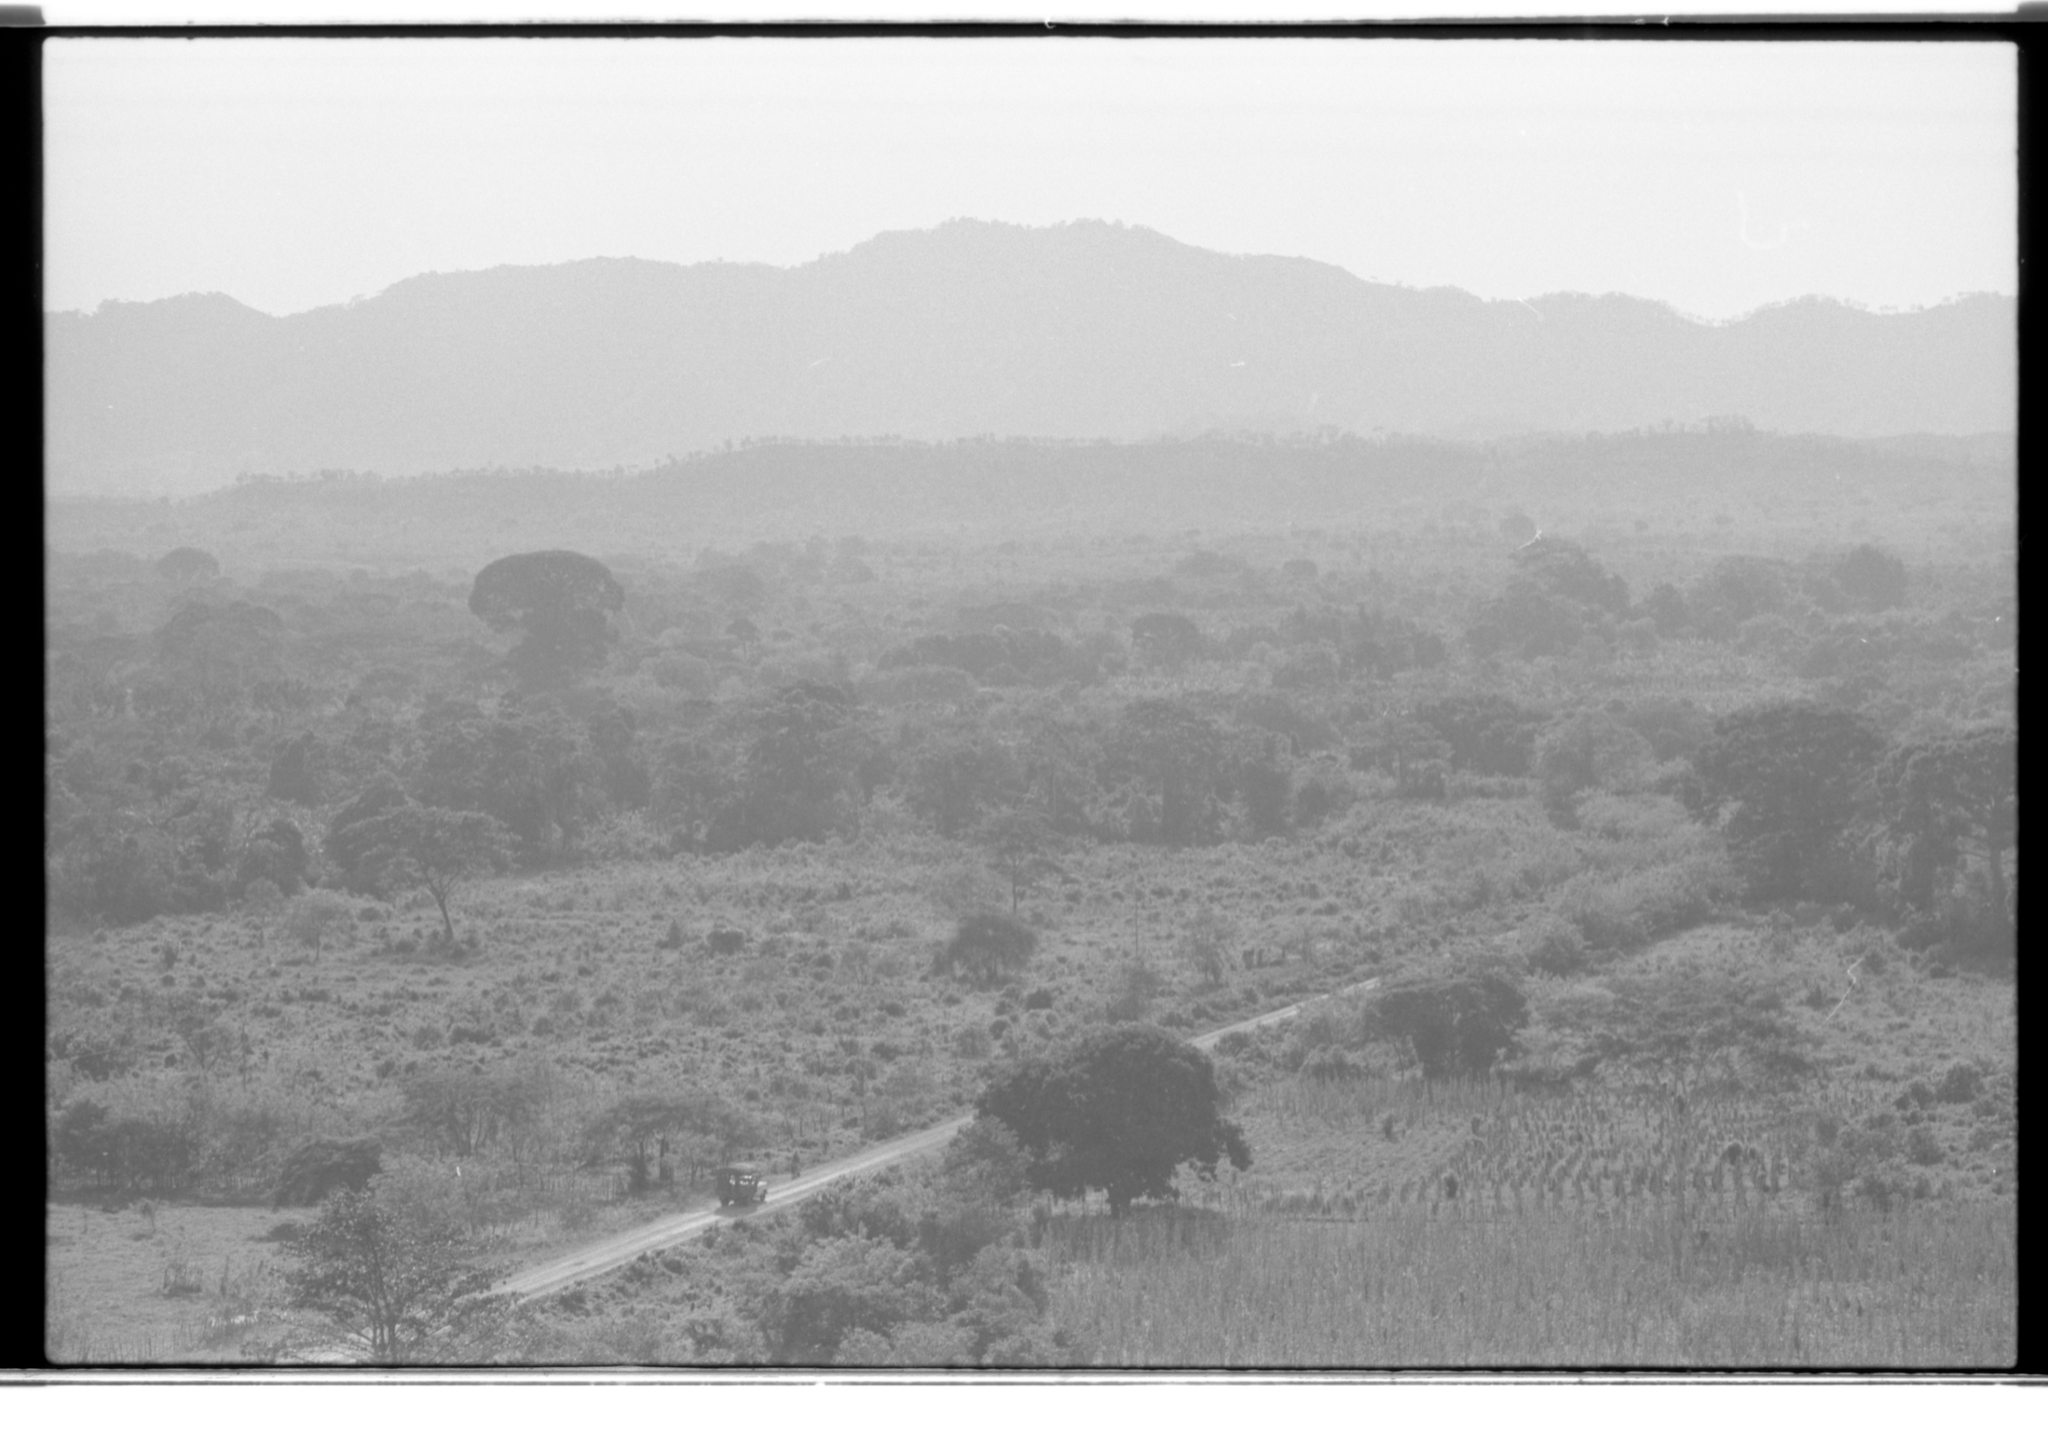 a foggy landscape image in black and white